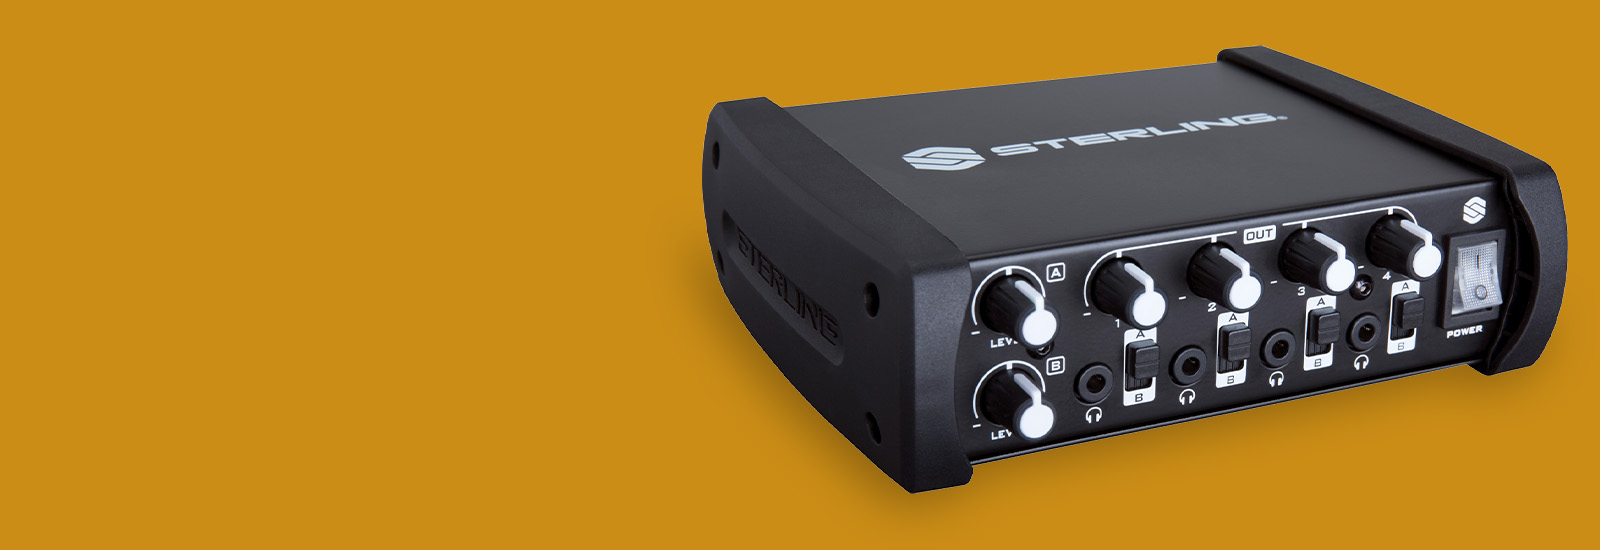 Sterling Sha4 8-channel desktop headphone amplifier angled right on yellow background.